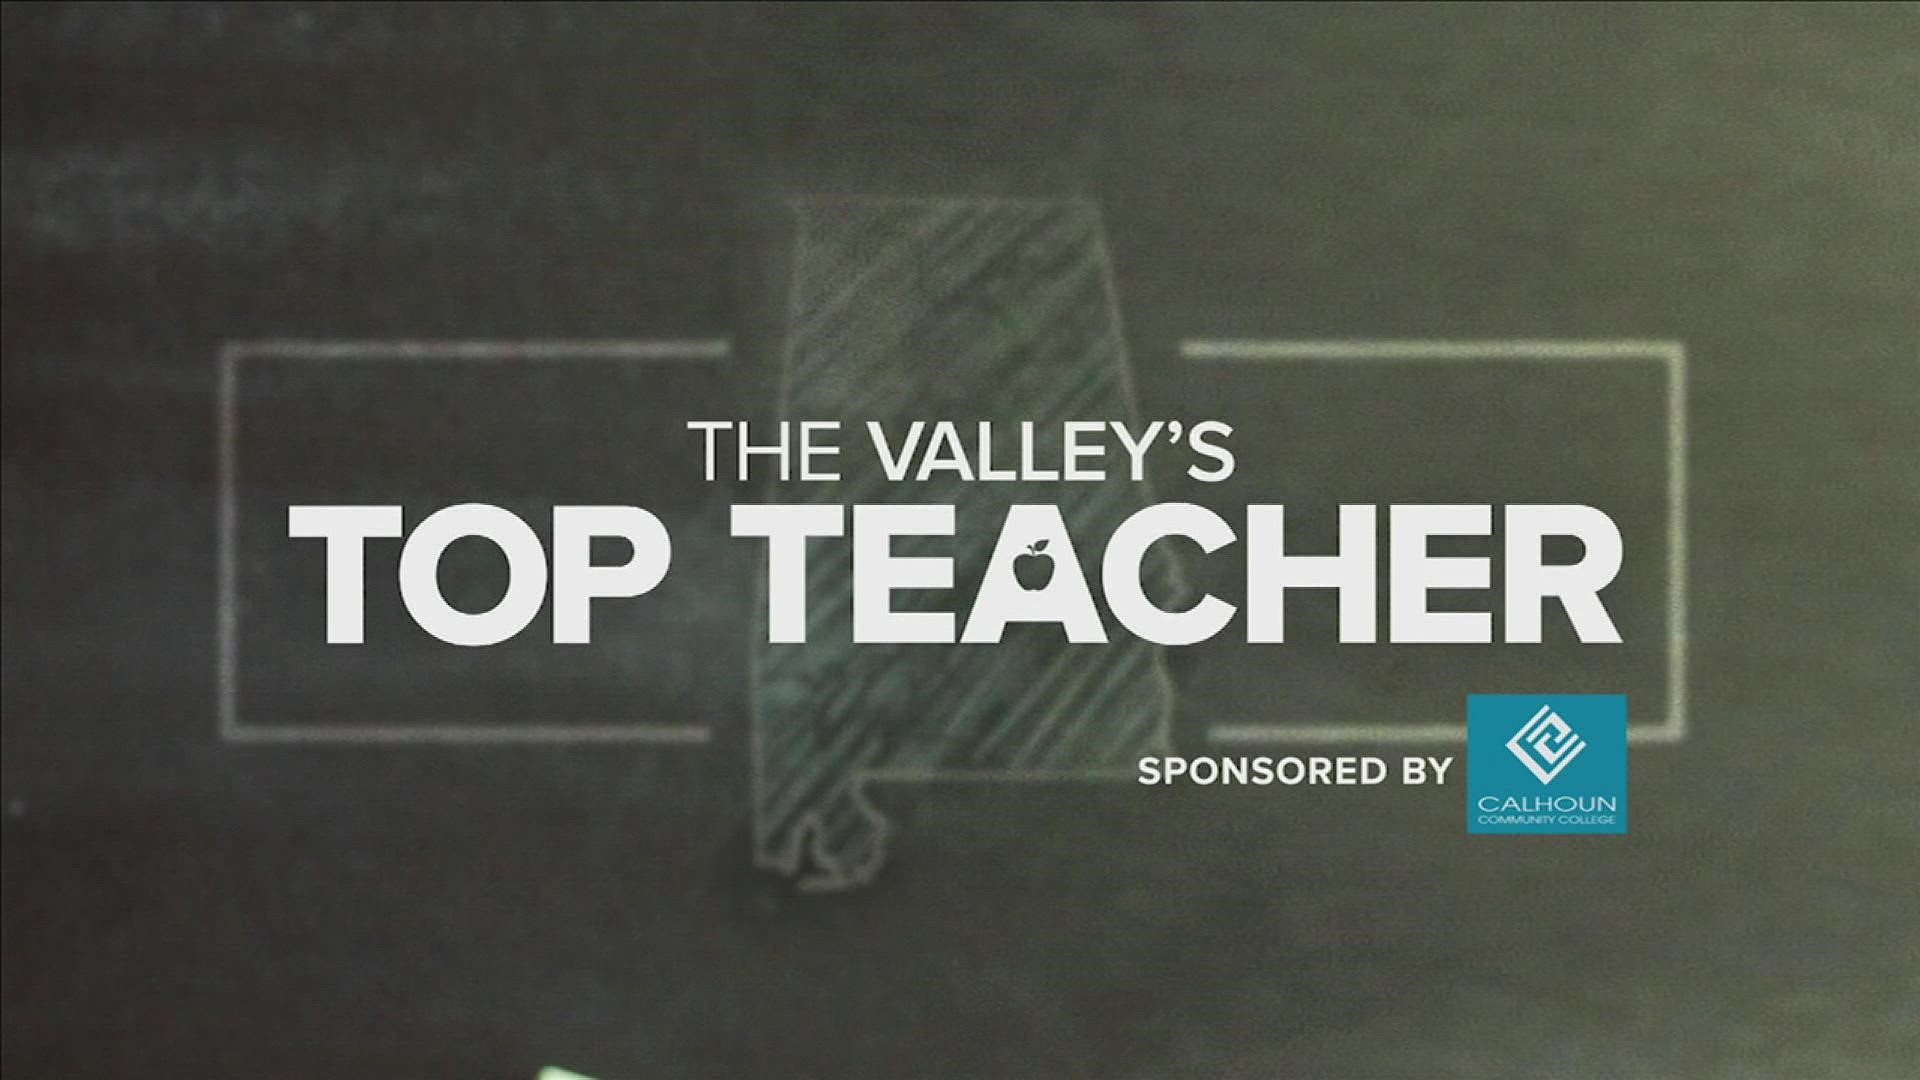 This week's Top Teacher is Jane Haithcock, an eighth grade instructor at Liberty Middle School.